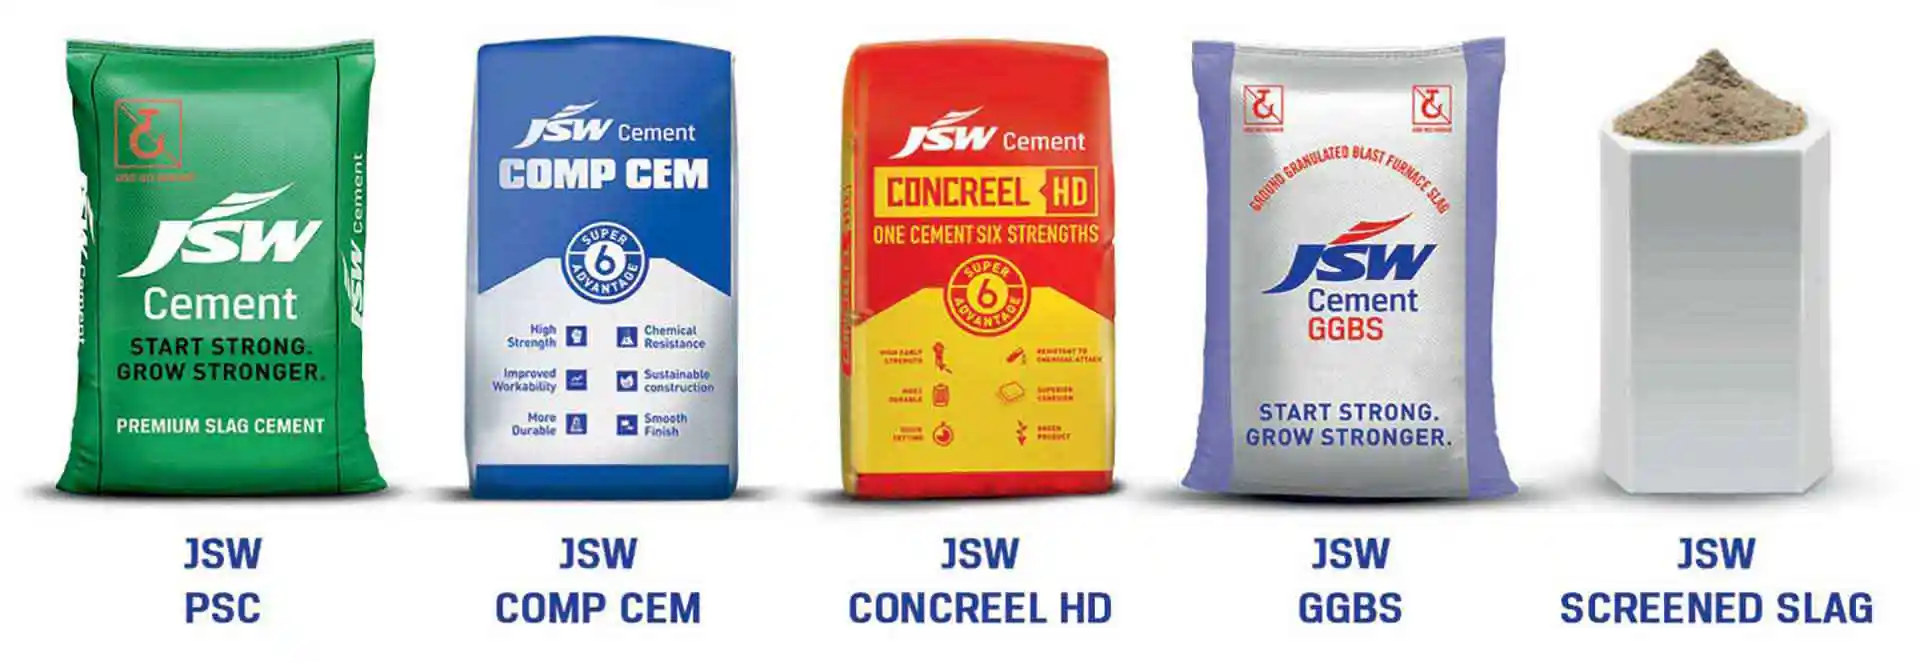 Mark Associates - JSW Cement Chettinad Cement Penna Cement Maha Cement  Maruti Cement Shankar Cement Stargold Cement Ultratech Cement Ramco Cement  Bharathi Cement Birla Cement Priya Cement Dalmia Cement . For more